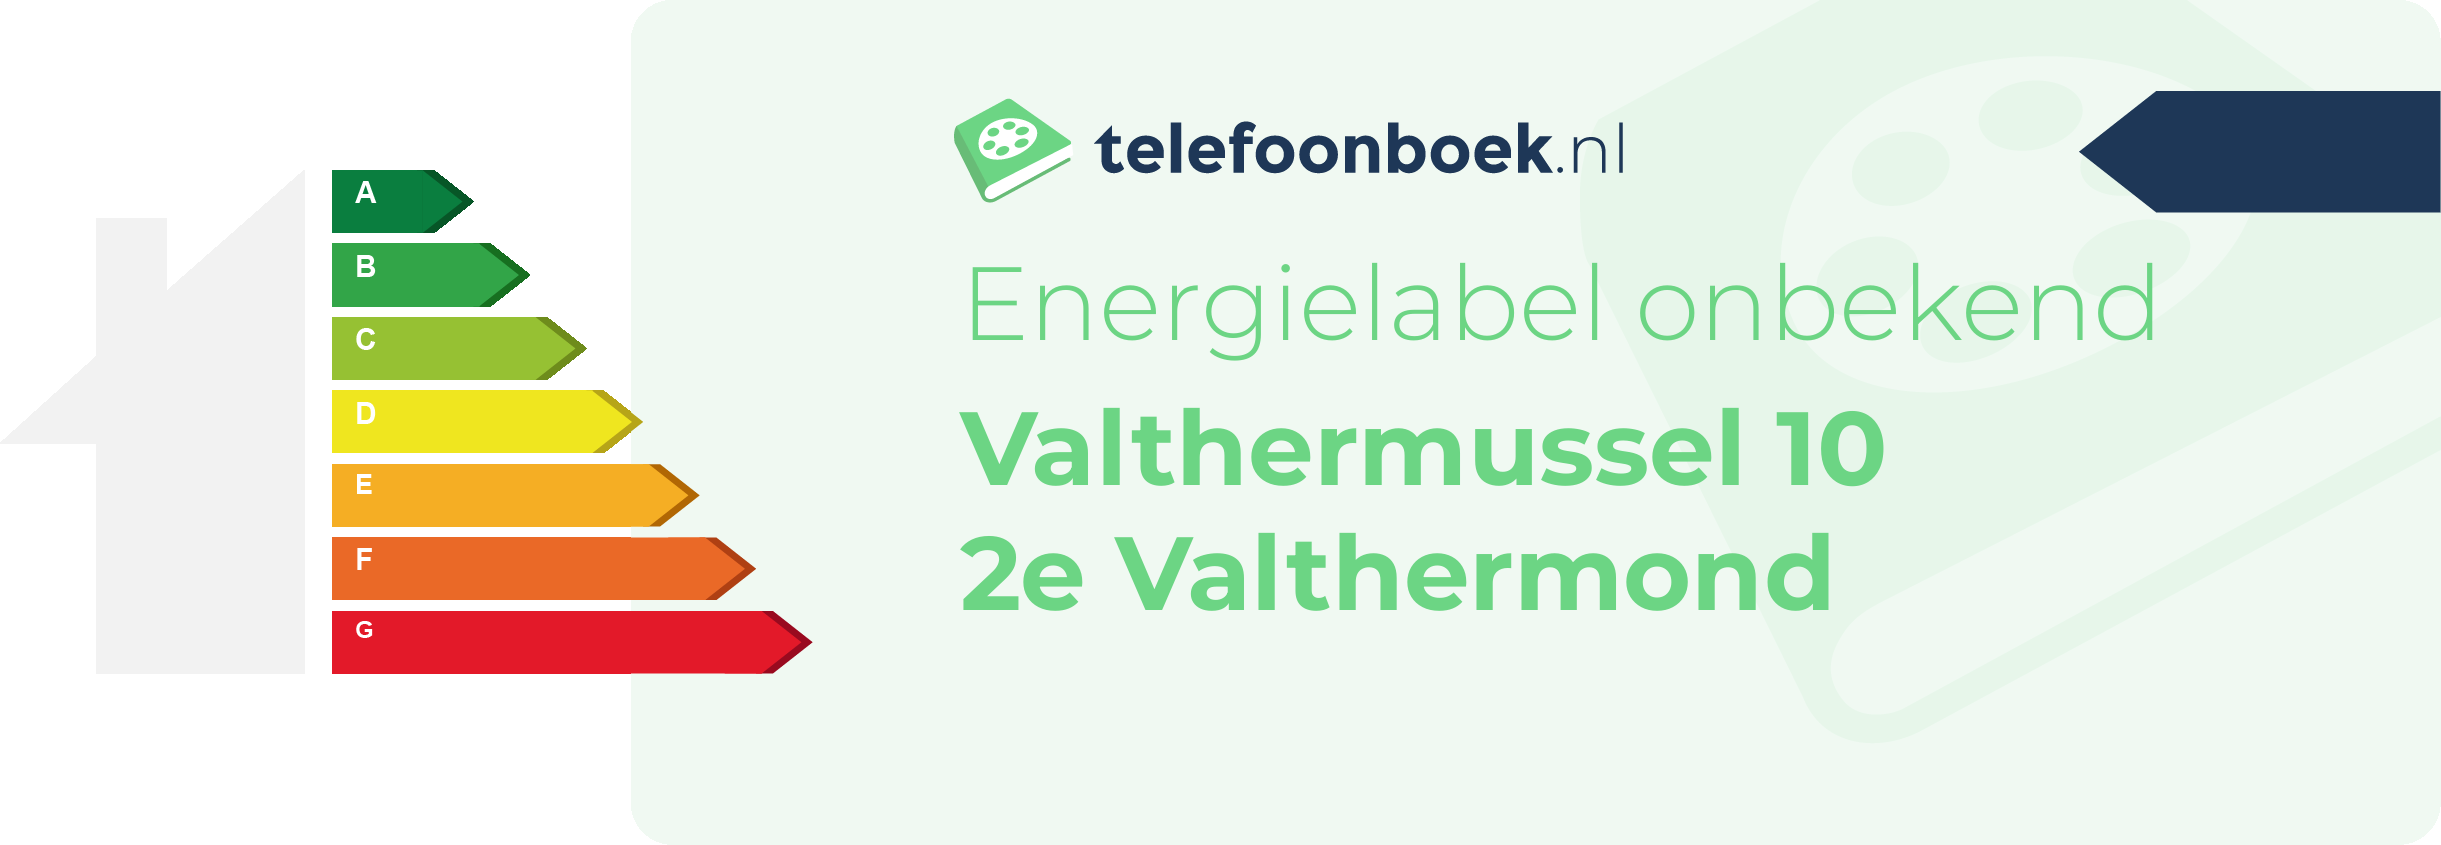 Energielabel Valthermussel 10 2e Valthermond